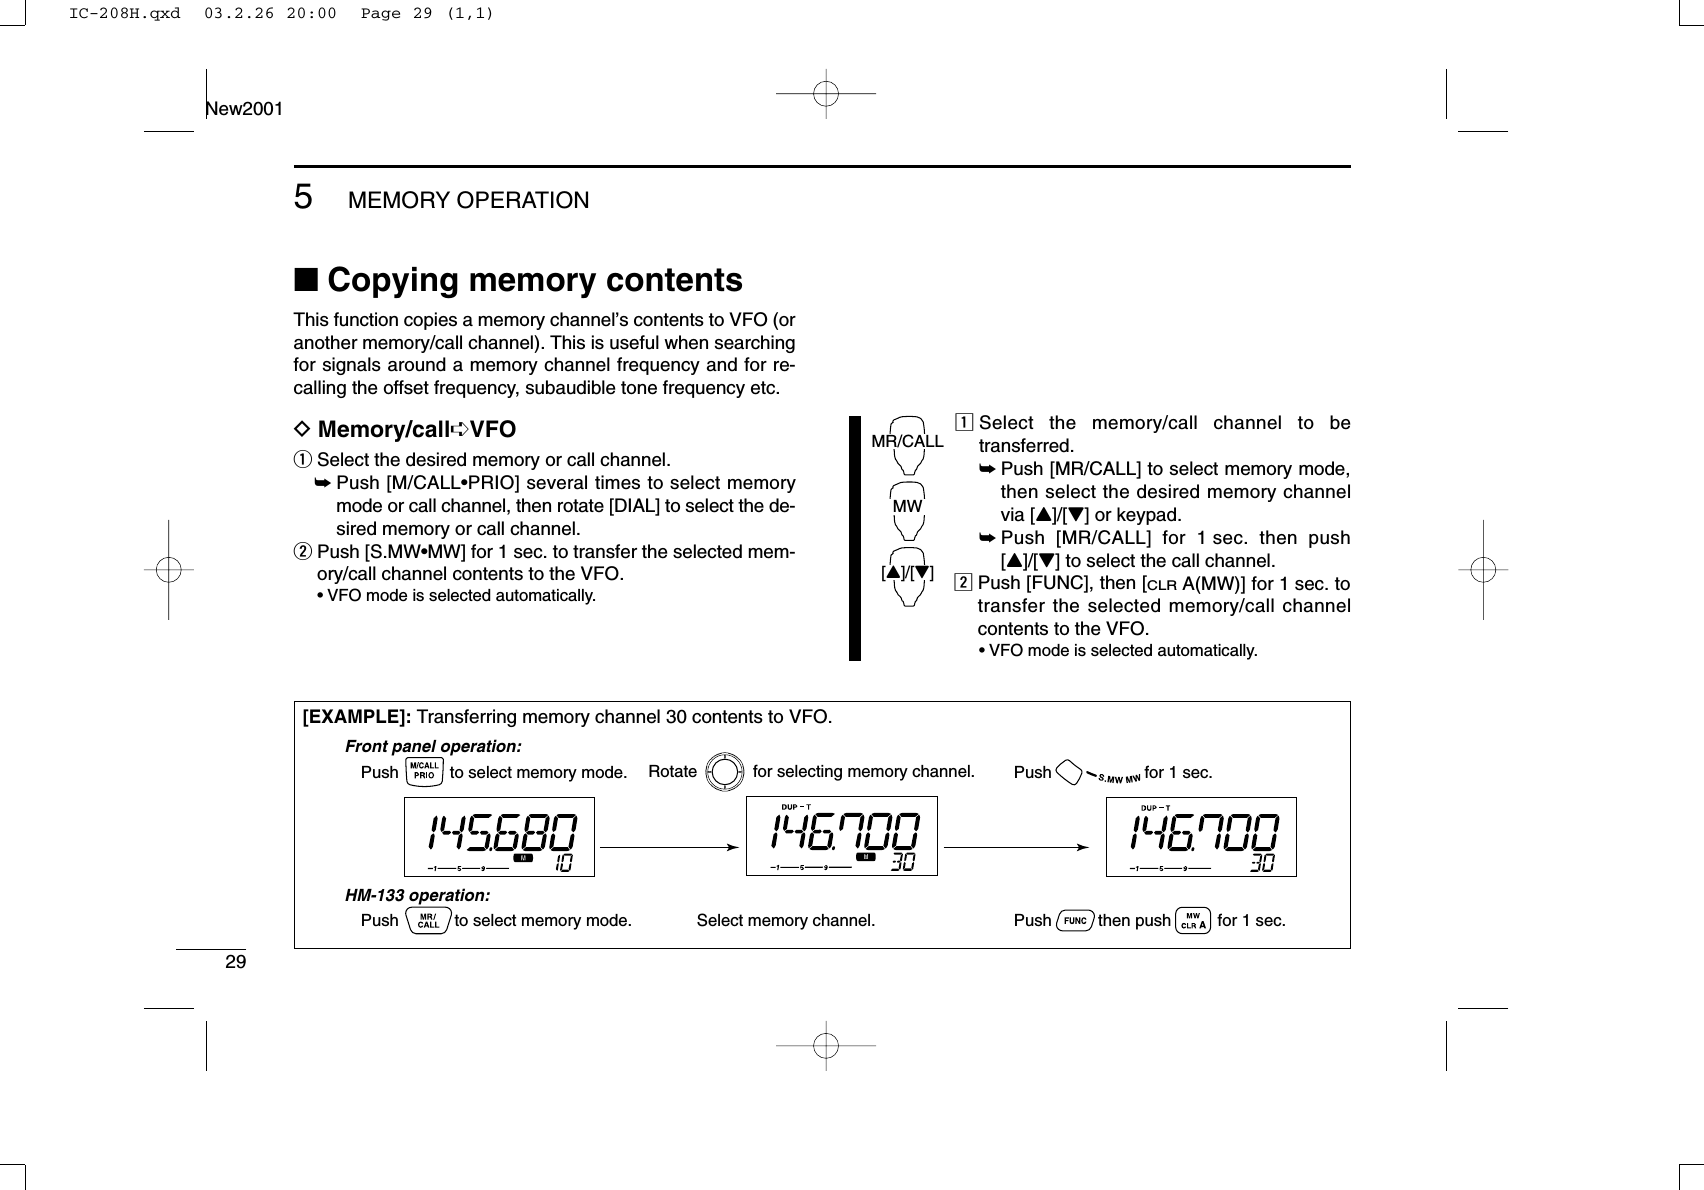 295MEMORY OPERATIONNew2001■Copying memory contentsThis function copies a memory channel’s contents to VFO (oranother memory/call channel). This is useful when searchingfor signals around a memory channel frequency and for re-calling the offset frequency, subaudible tone frequency etc.DMemory/call➪VFOqSelect the desired memory or call channel.➥Push [M/CALL•PRIO] several times to select memorymode or call channel, then rotate [DIAL] to select the de-sired memory or call channel.wPush [S.MW•MW] for 1 sec. to transfer the selected mem-ory/call channel contents to the VFO.•VFO mode is selected automatically.zSelect the memory/call channel to betransferred.➥Push [MR/CALL] to select memory mode,then select the desired memory channelvia [Y]/[Z] or keypad.➥Push [MR/CALL] for 1 sec. then push[Y]/[Z] to select the call channel.xPush [FUNC], then [CLRA(MW)] for 1 sec. totransfer the selected memory/call channelcontents to the VFO.•VFO mode is selected automatically.MR/CALLMW[Y]/[Z][EXAMPLE]: Transferring memory channel 30 contents to VFO.Push           to select memory mode.Front panel operation:HM-133 operation:Push            to select memory mode.Rotate            for selecting memory channel.Select memory channel.Push                    for 1 sec.Push          then push          for 1 sec.IC-208H.qxd  03.2.26 20:00  Page 29 (1,1)